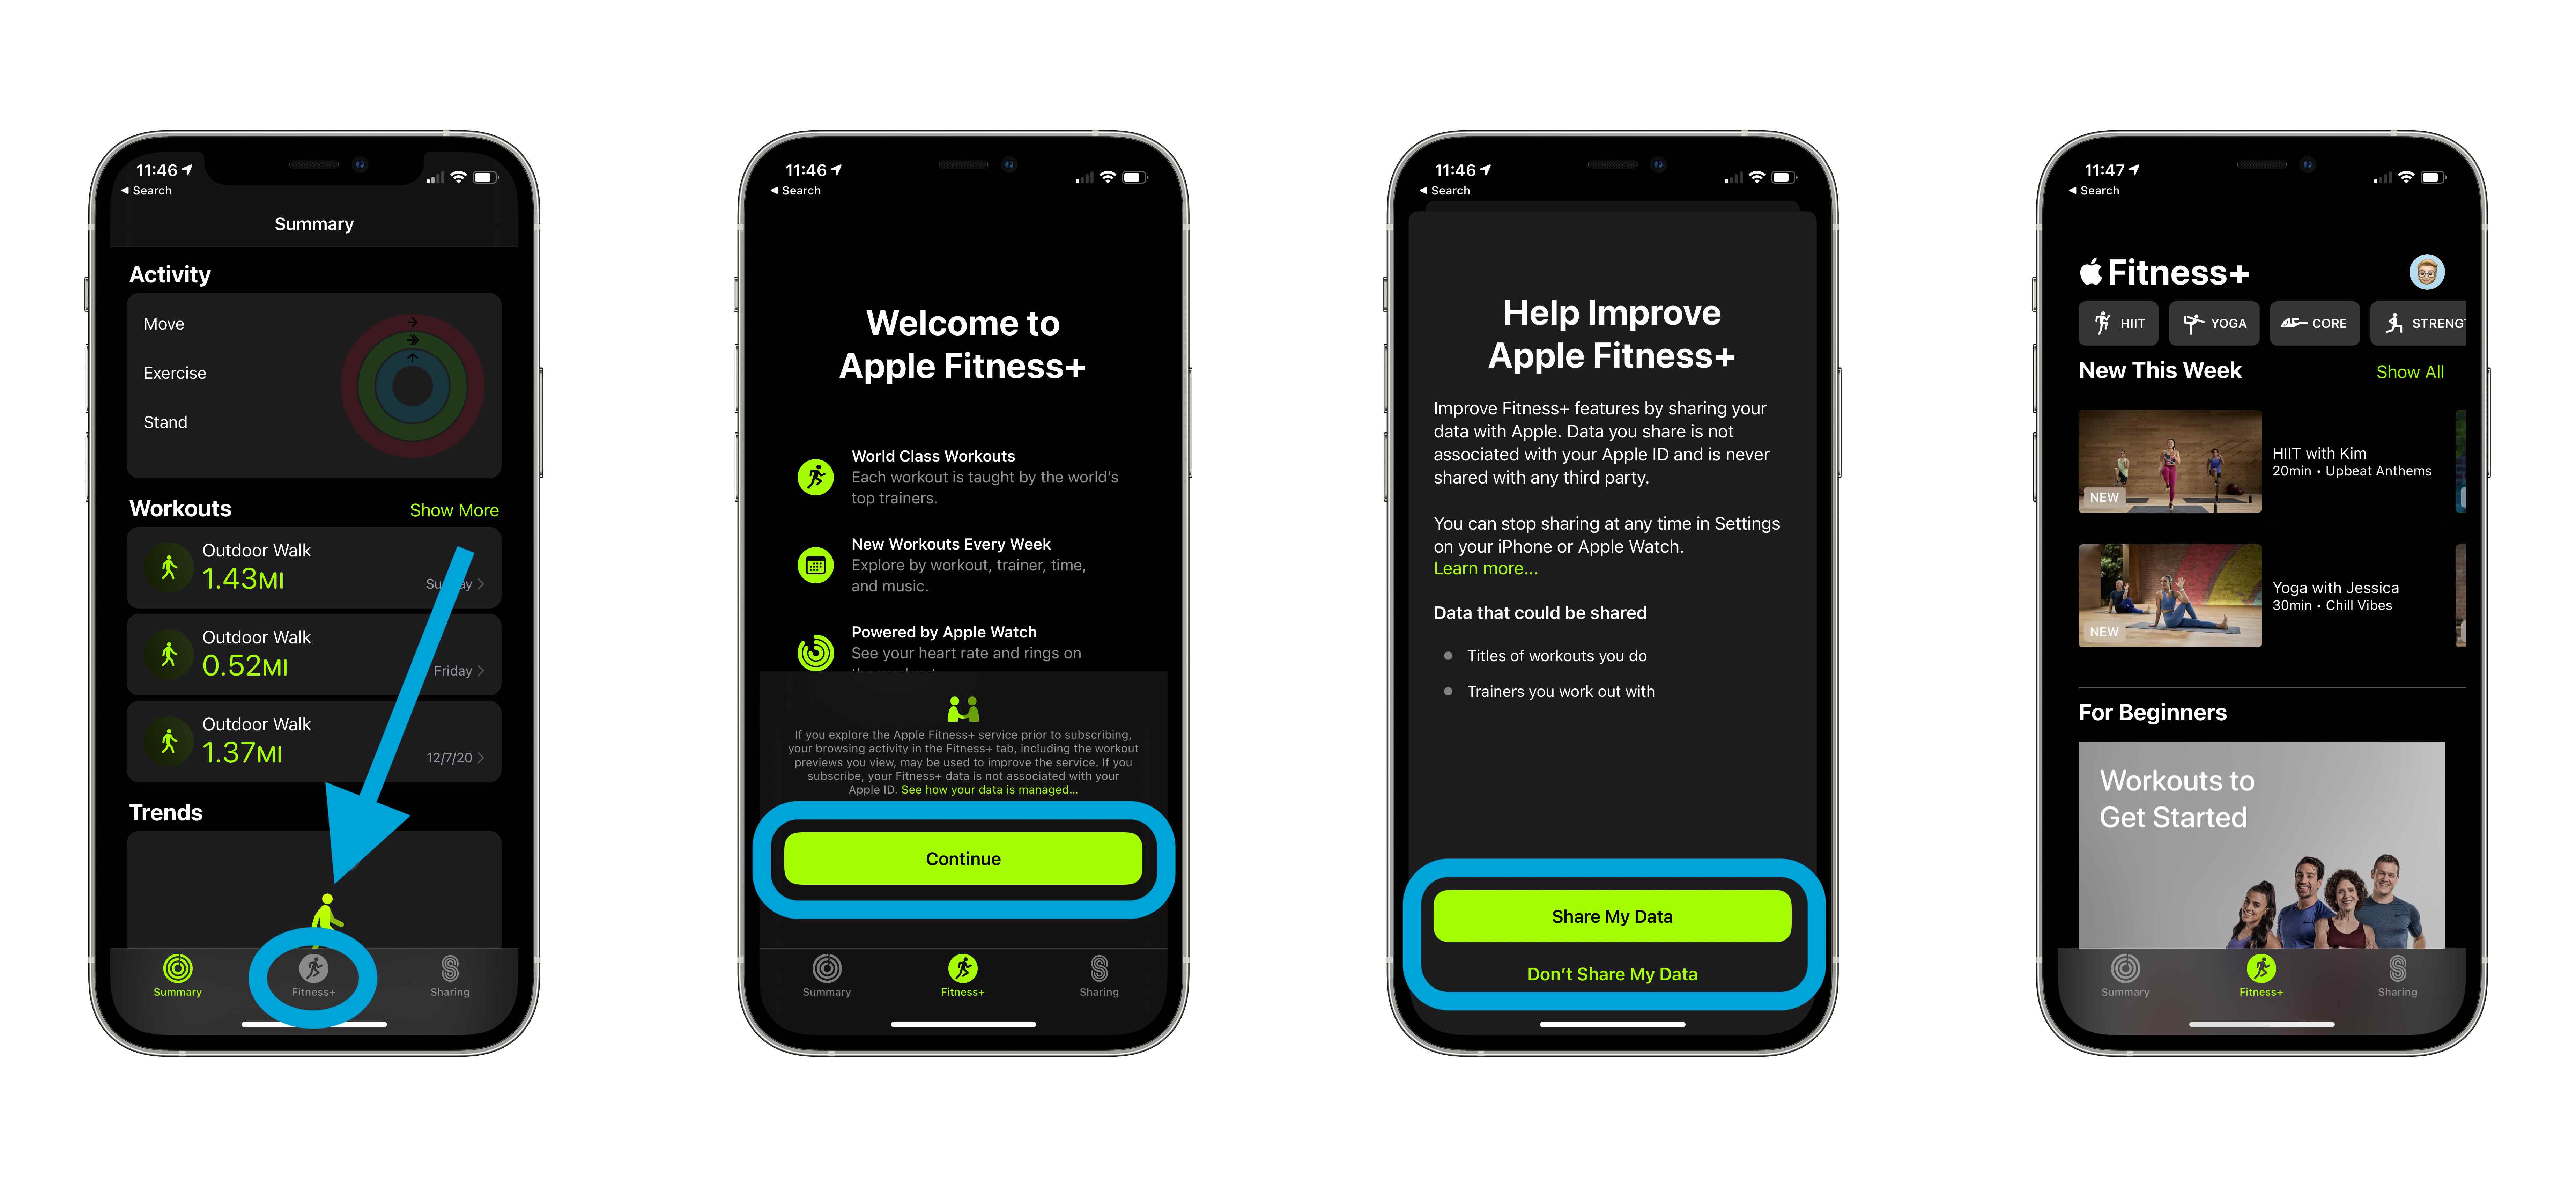 How to use Apple Fitness+ on iPhone signing up, more